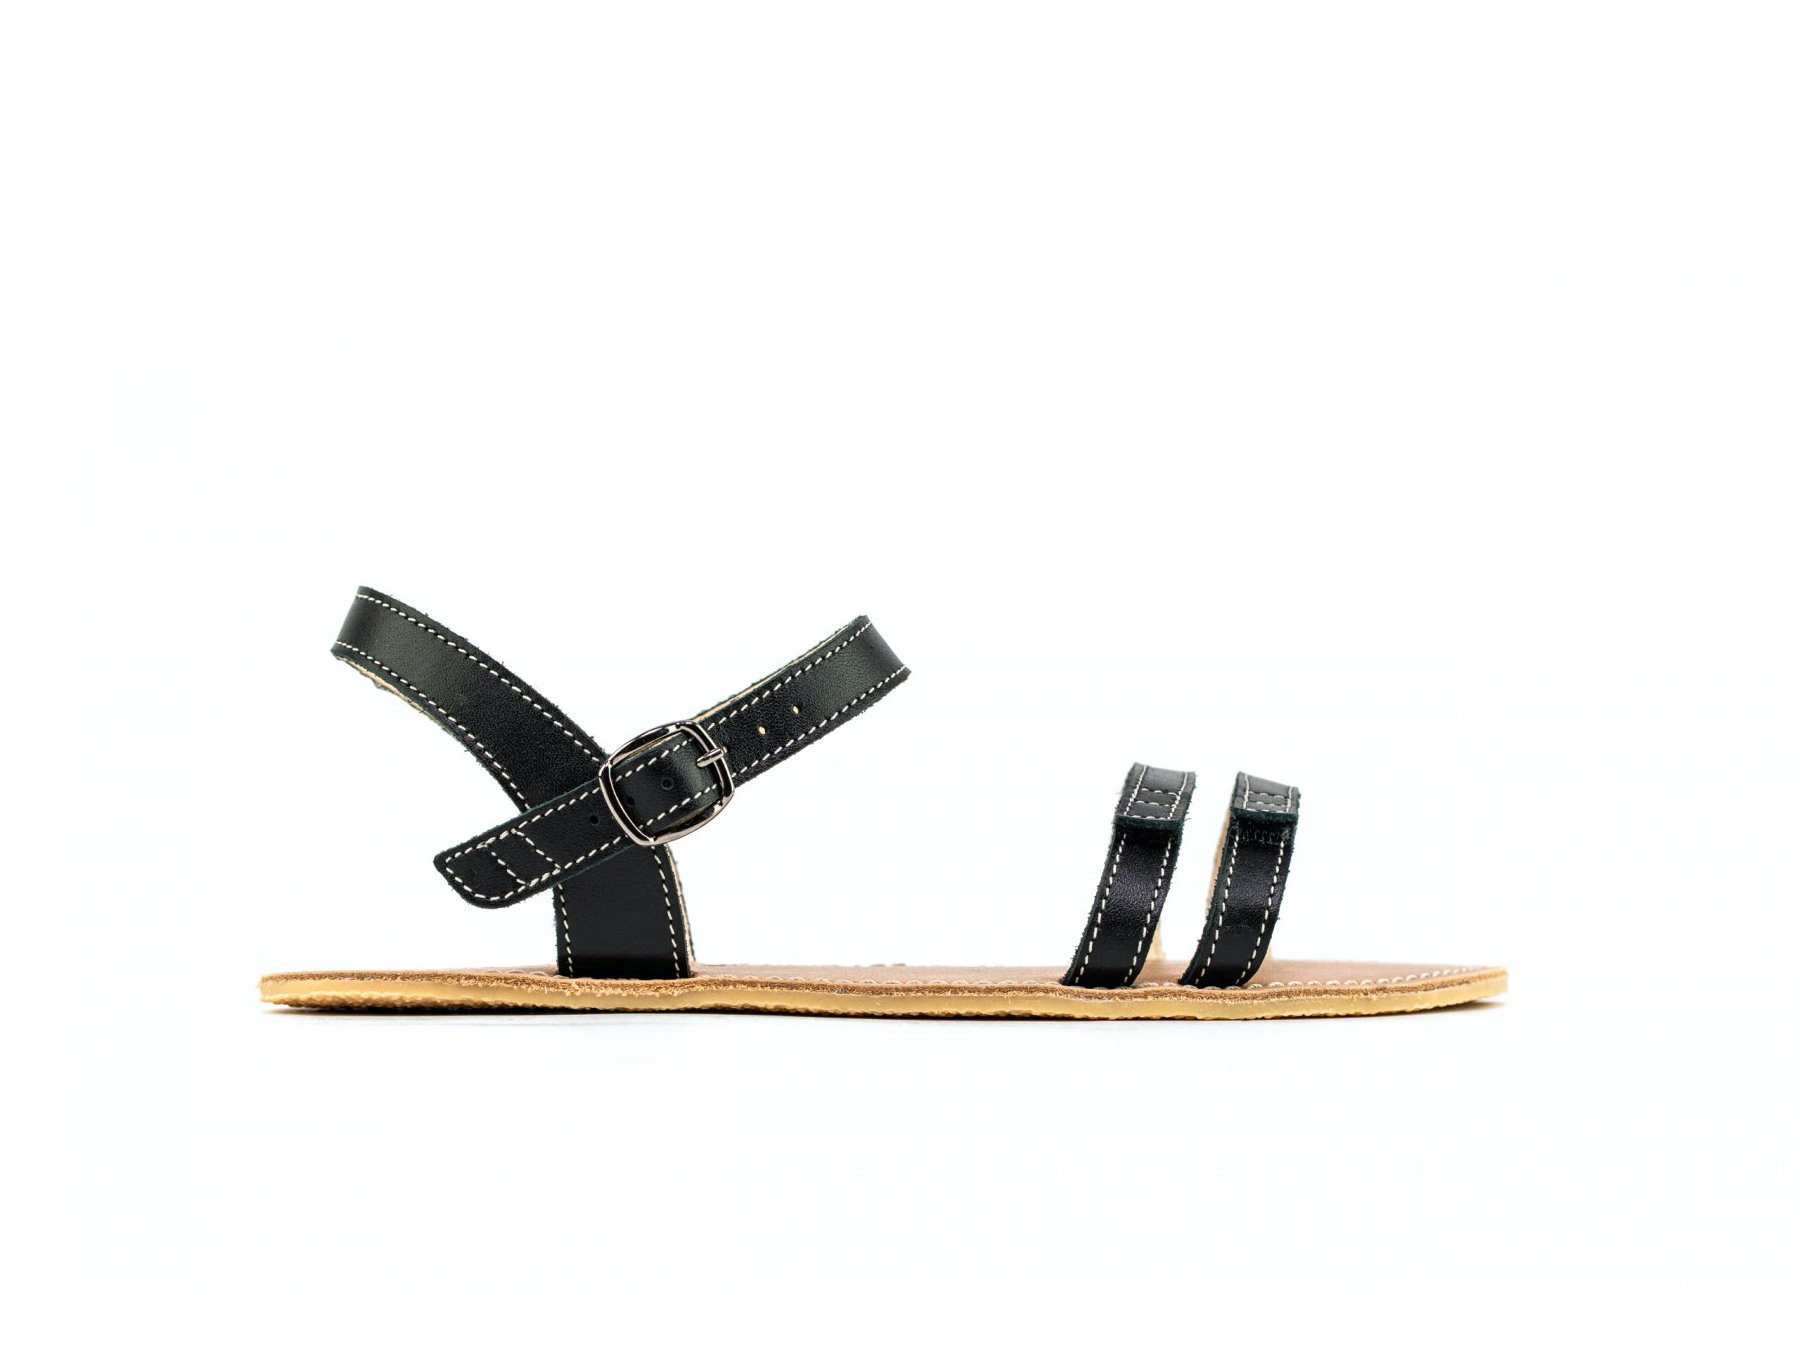 Crupon Sandals - The Perfect Timeless Look in Barefoot Shoes